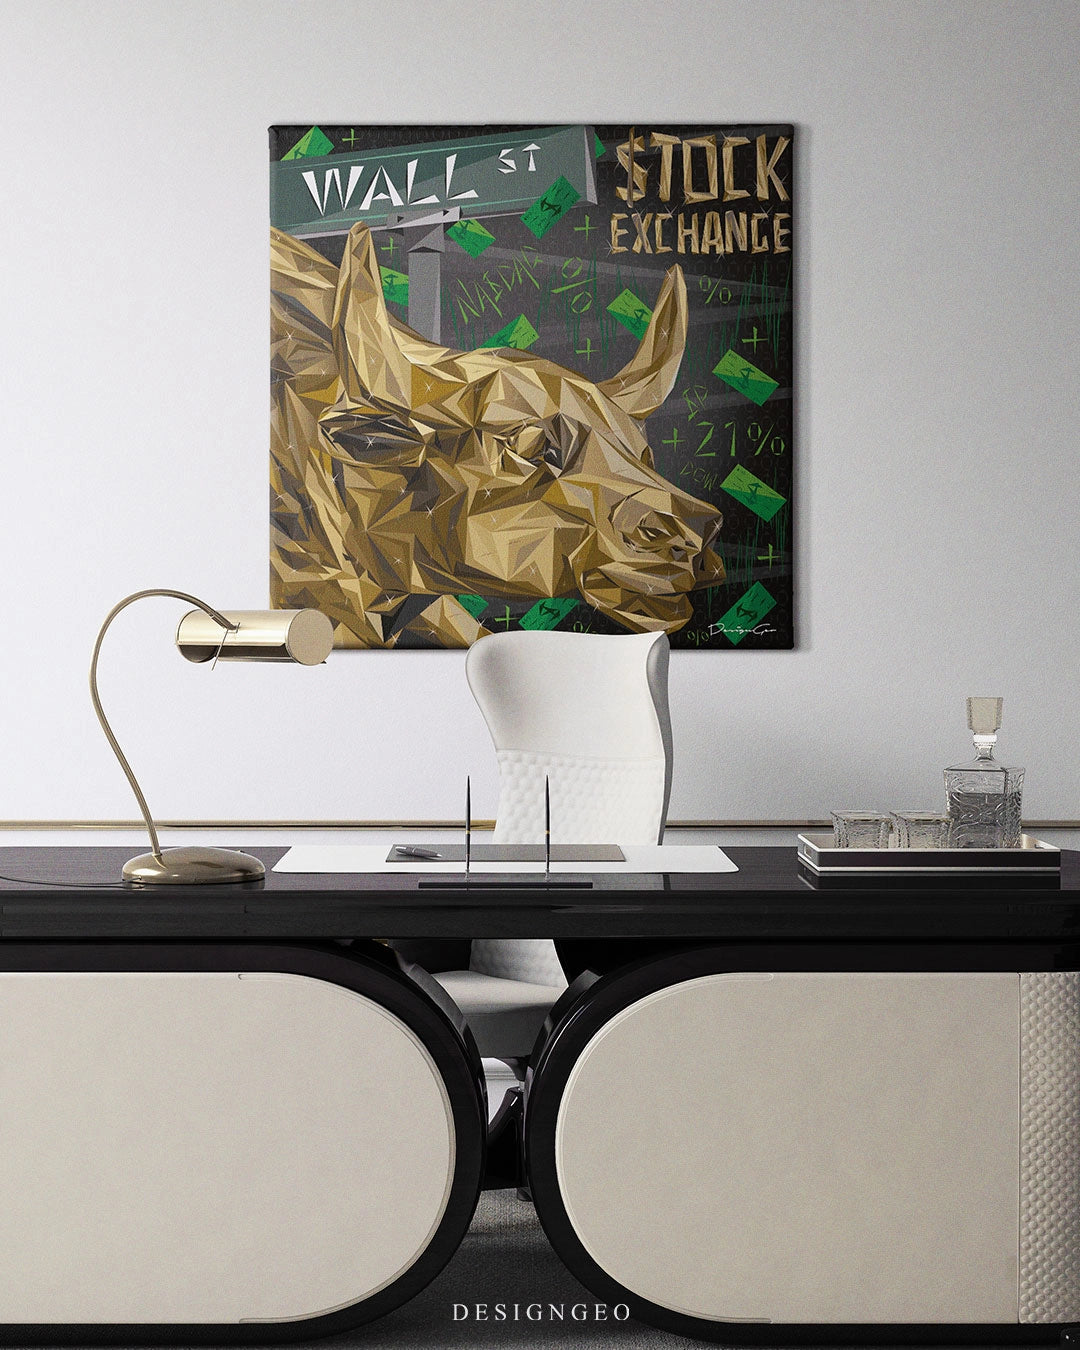 Wall Street Bull limited edition square canvas print created by designgeo